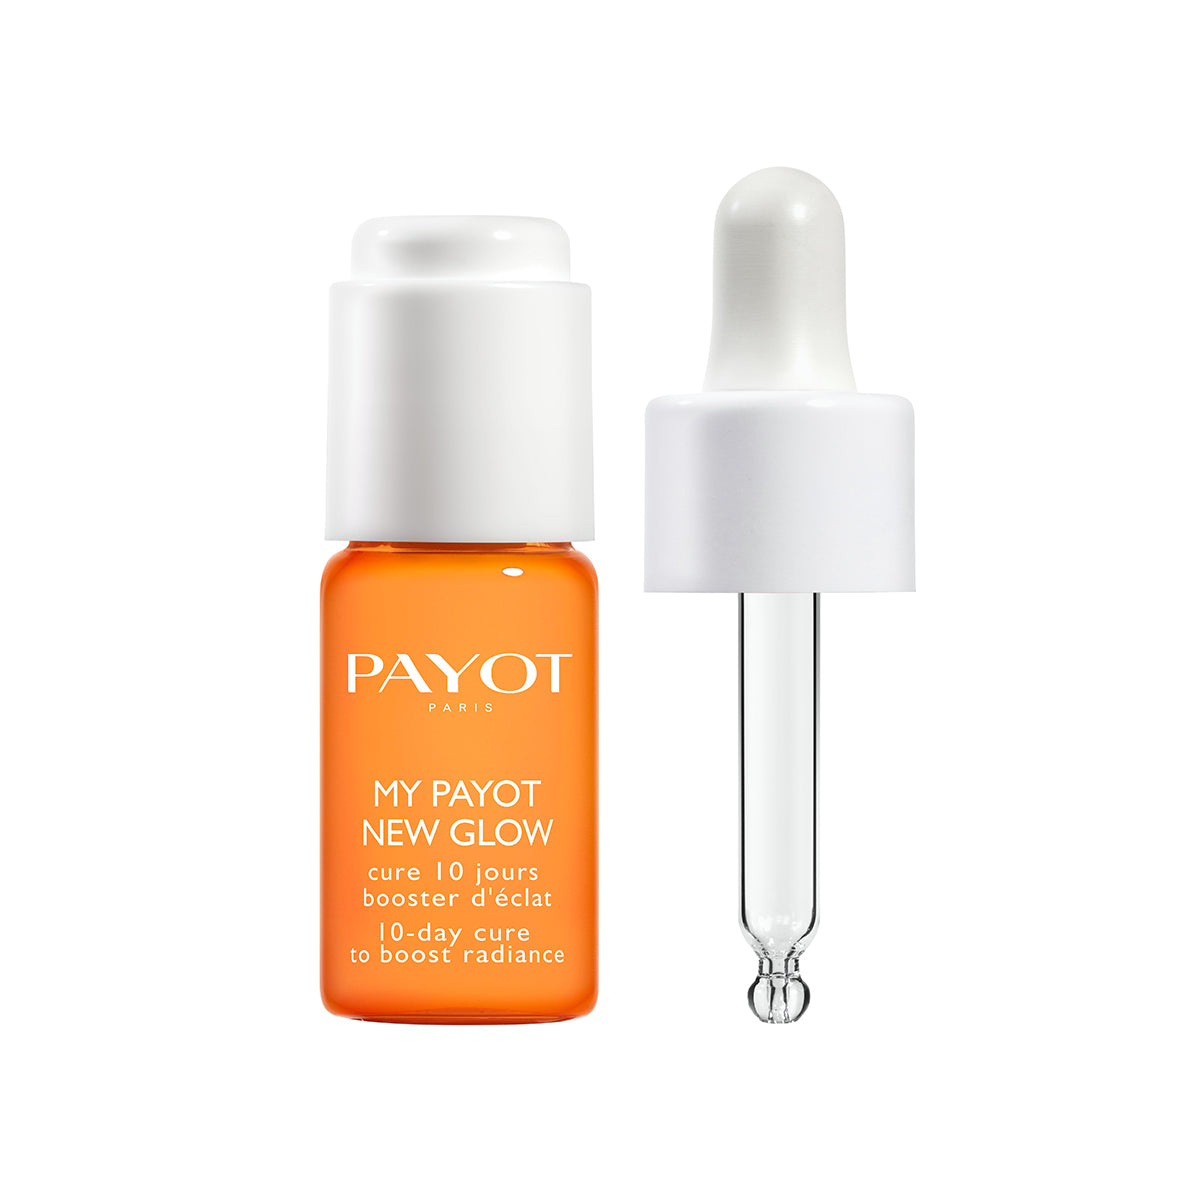 Payot My Payot Super Glow